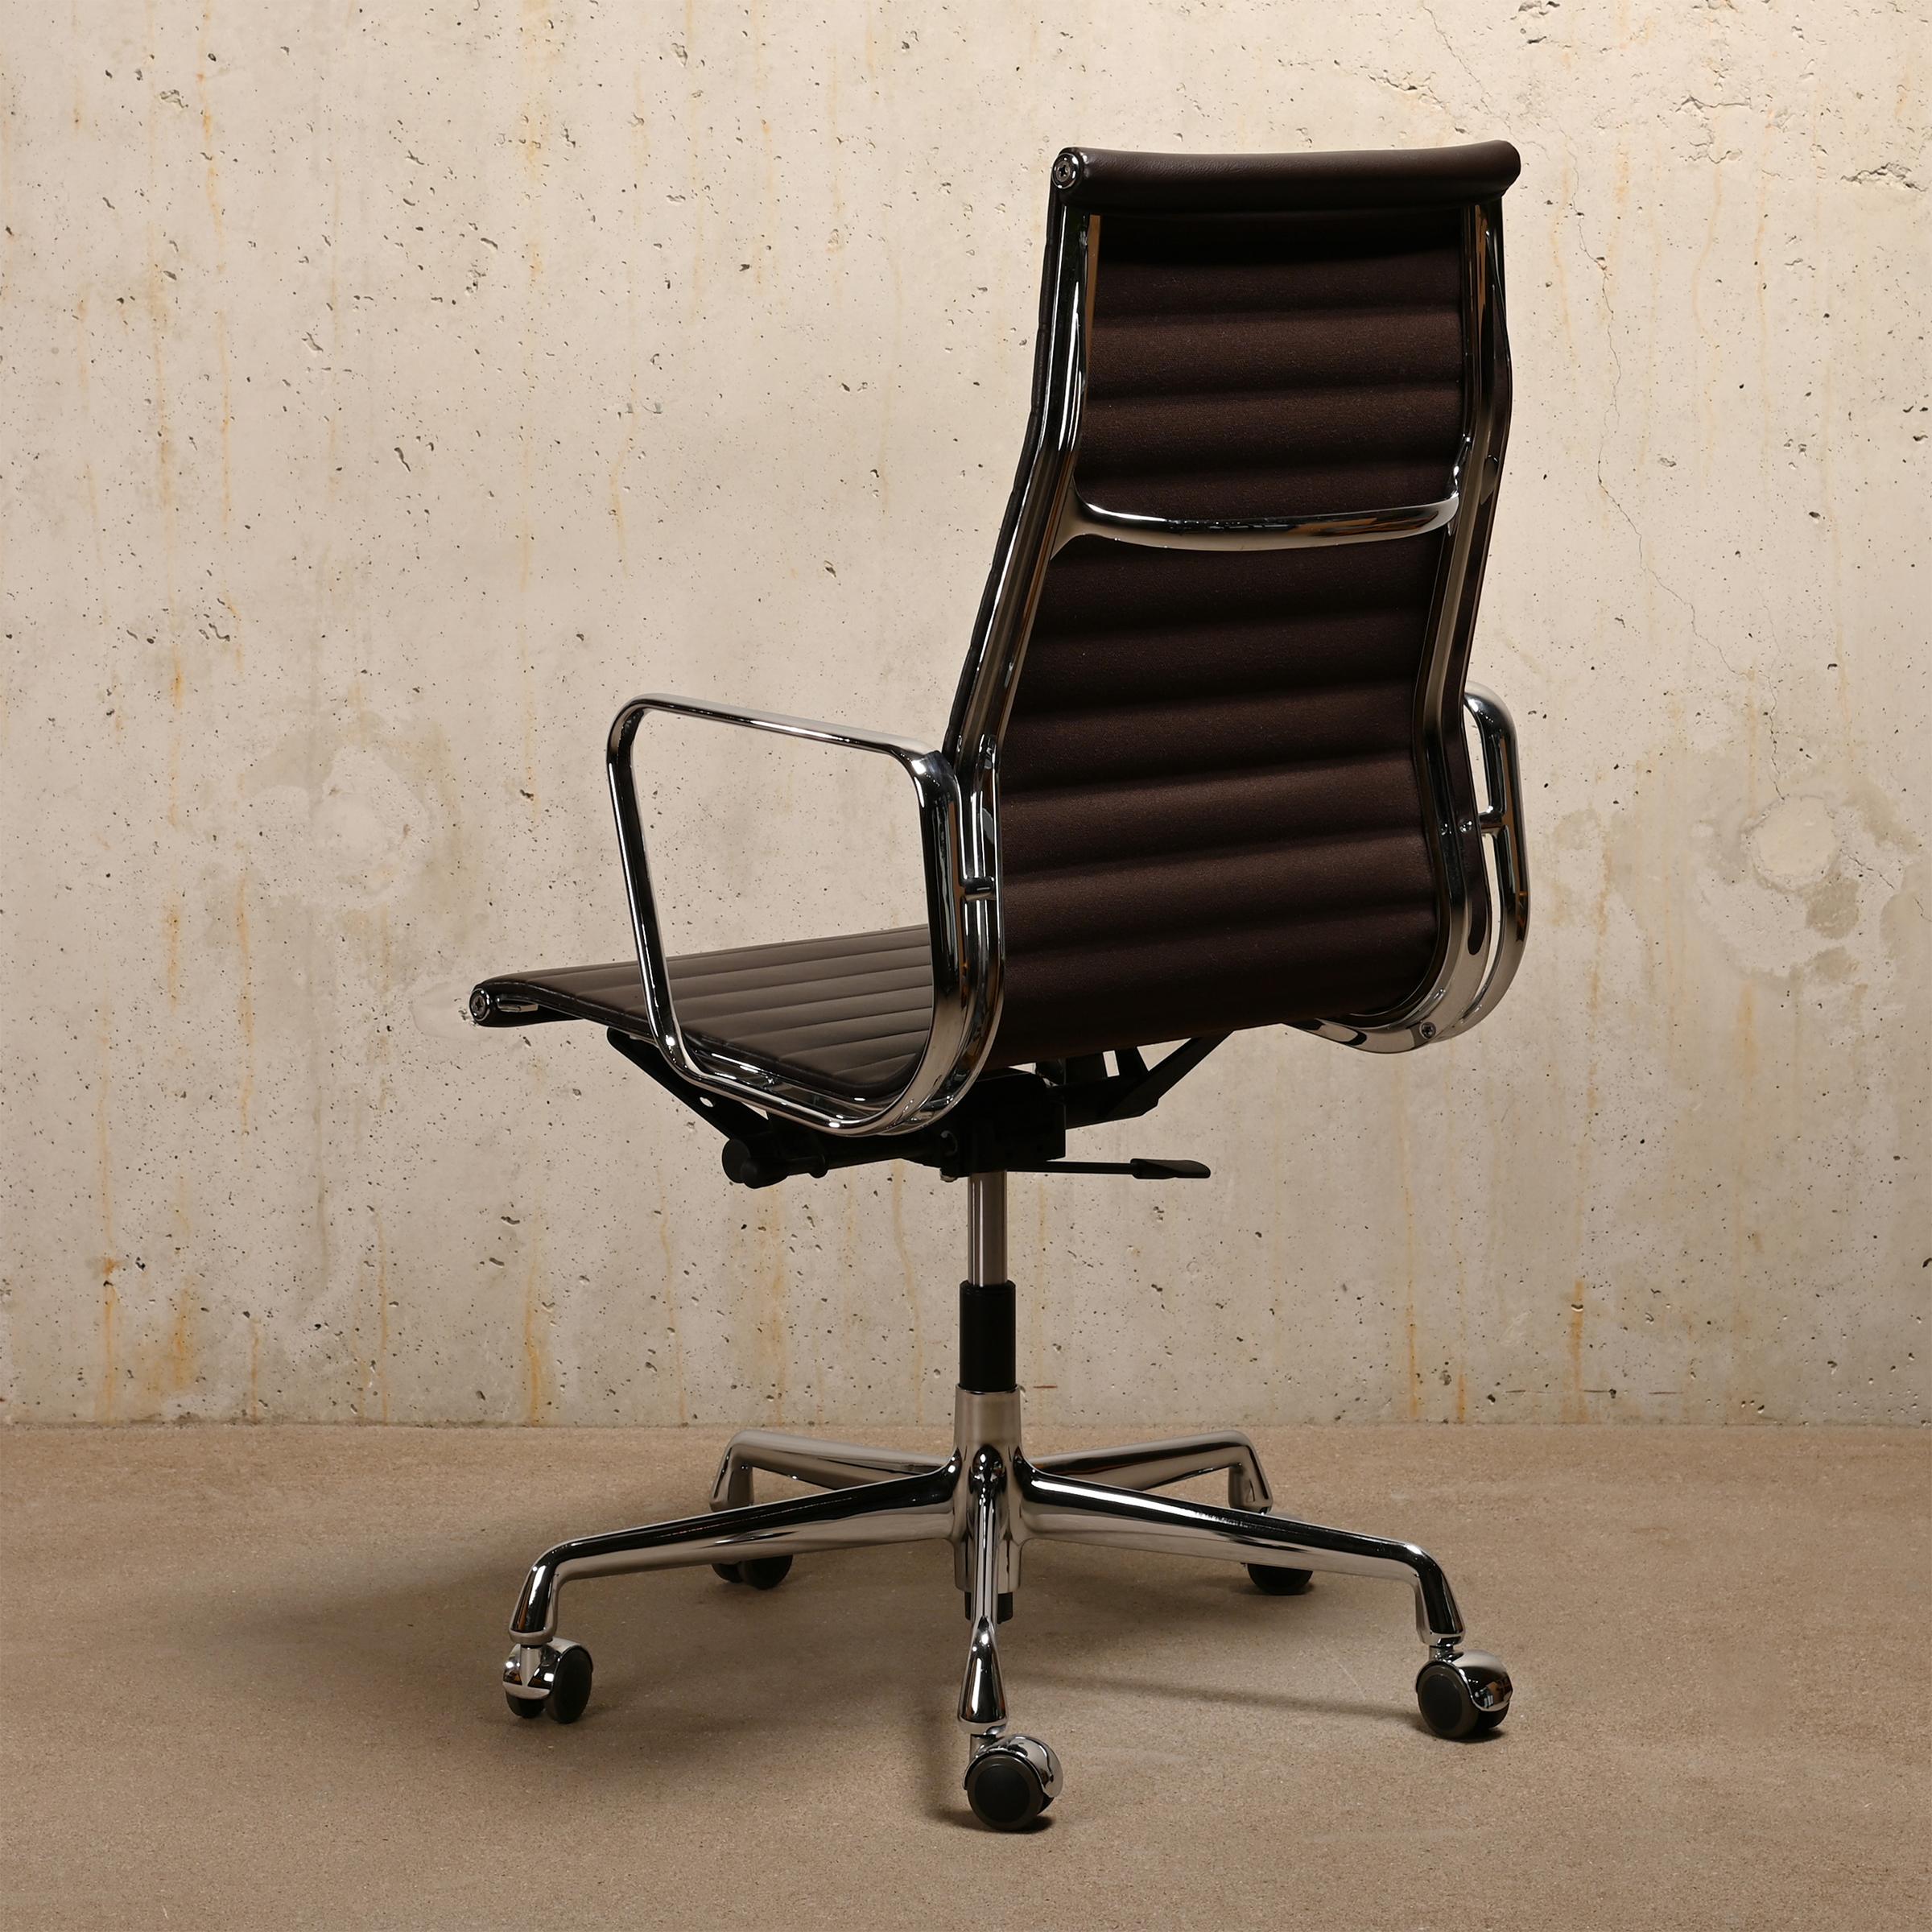 Aluminum Charles & Ray Eames EA119 Executive Office chair in dark brown leather for Vitra